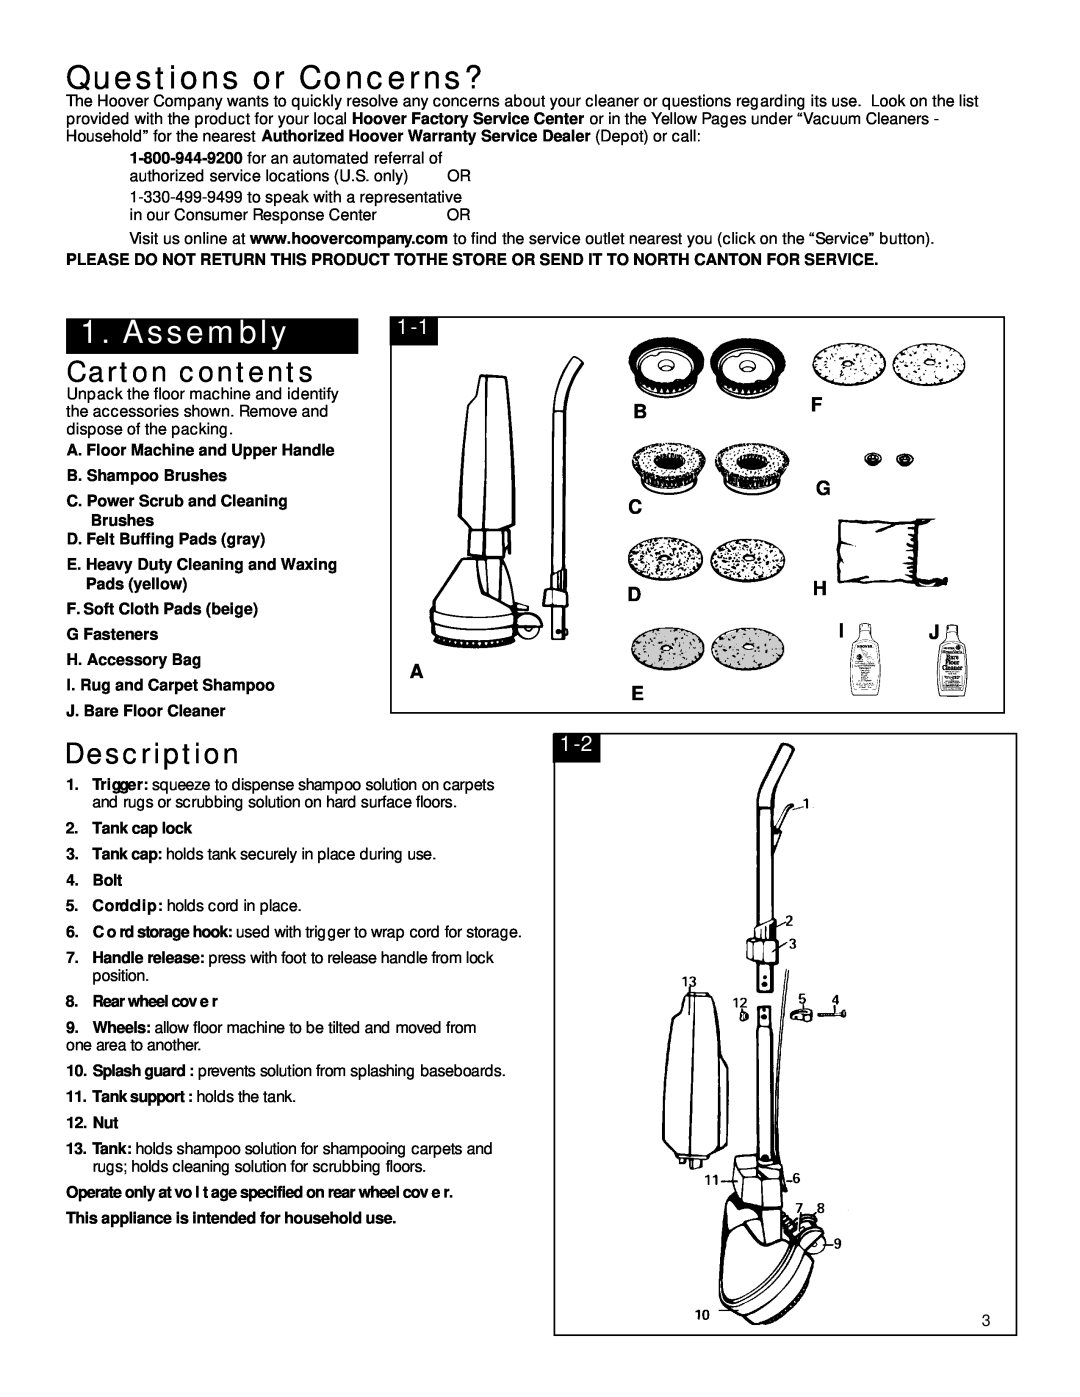 Hoover FloorMAX Supreme owner manual Questions or Concerns?, Assembly, Carton contents, Description1-2, Bf G C Dh Ij A E 